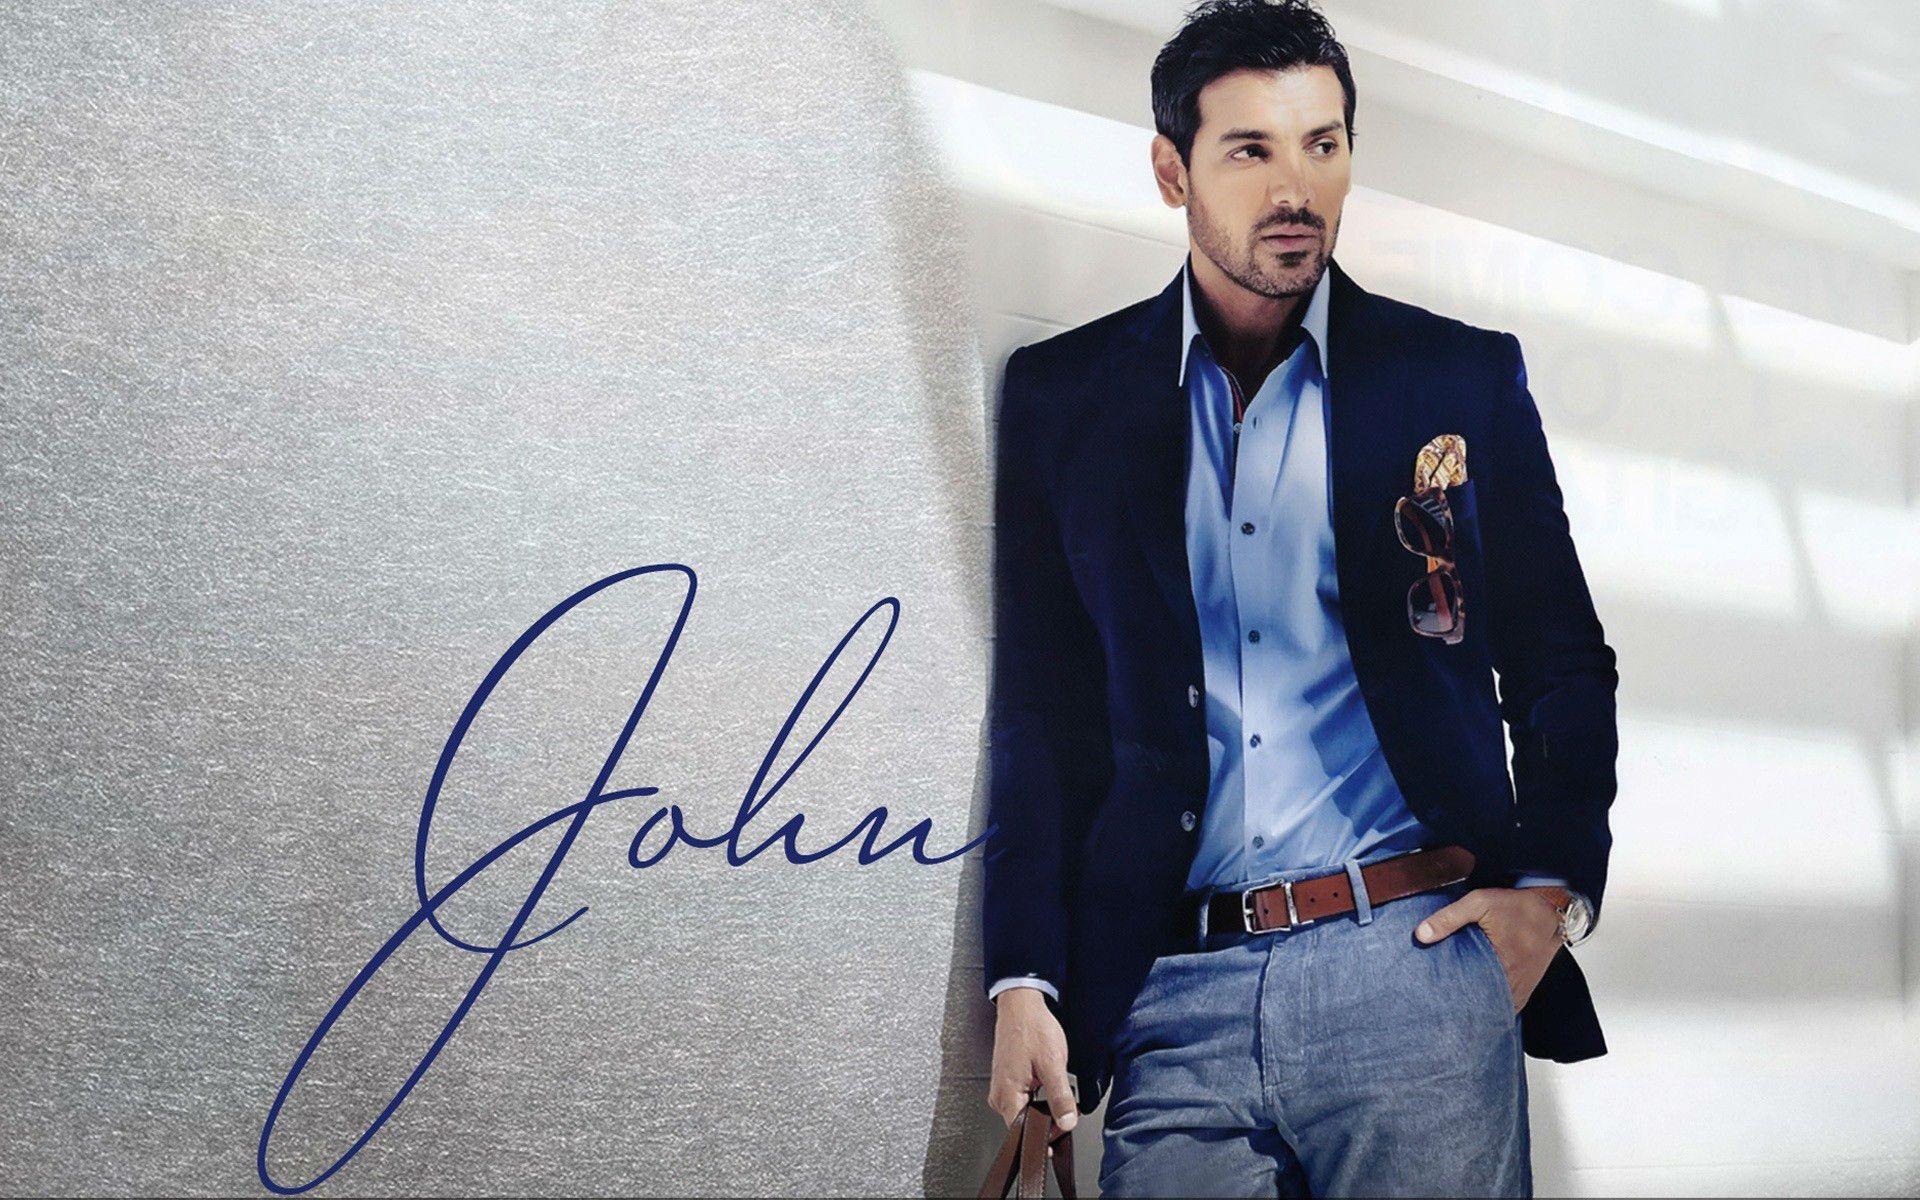 John Abraham Wallpaper High Resolution and Quality Download